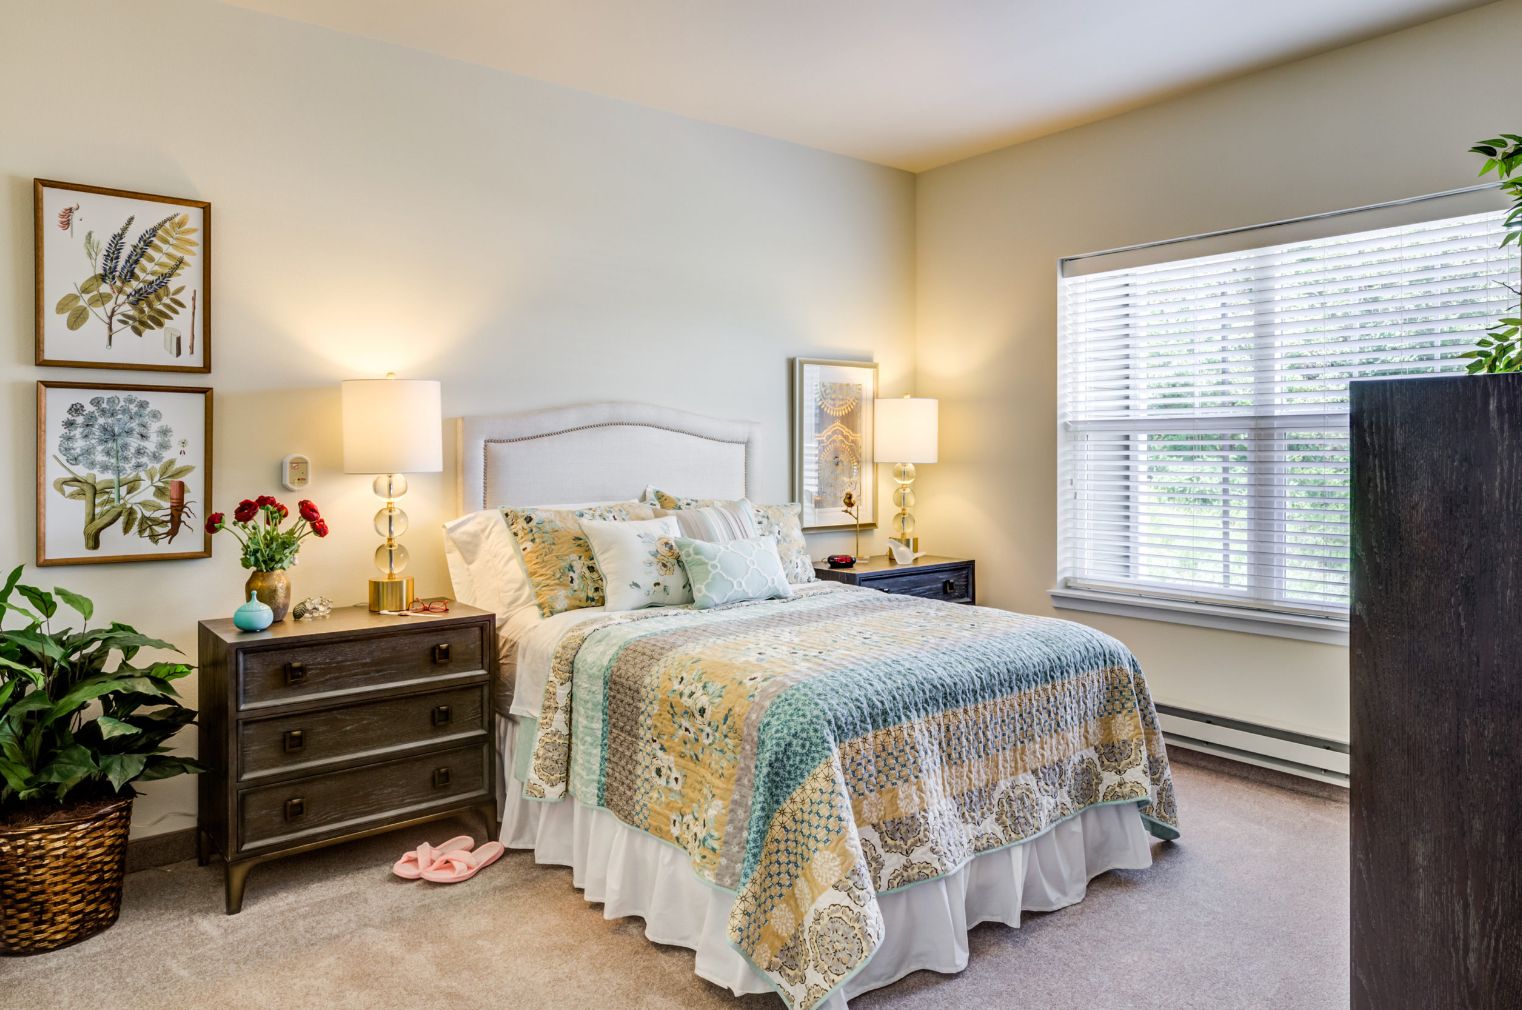 Interior view of a bedroom at Camellia Gardens Gracious Retirement Living with elegant decor.